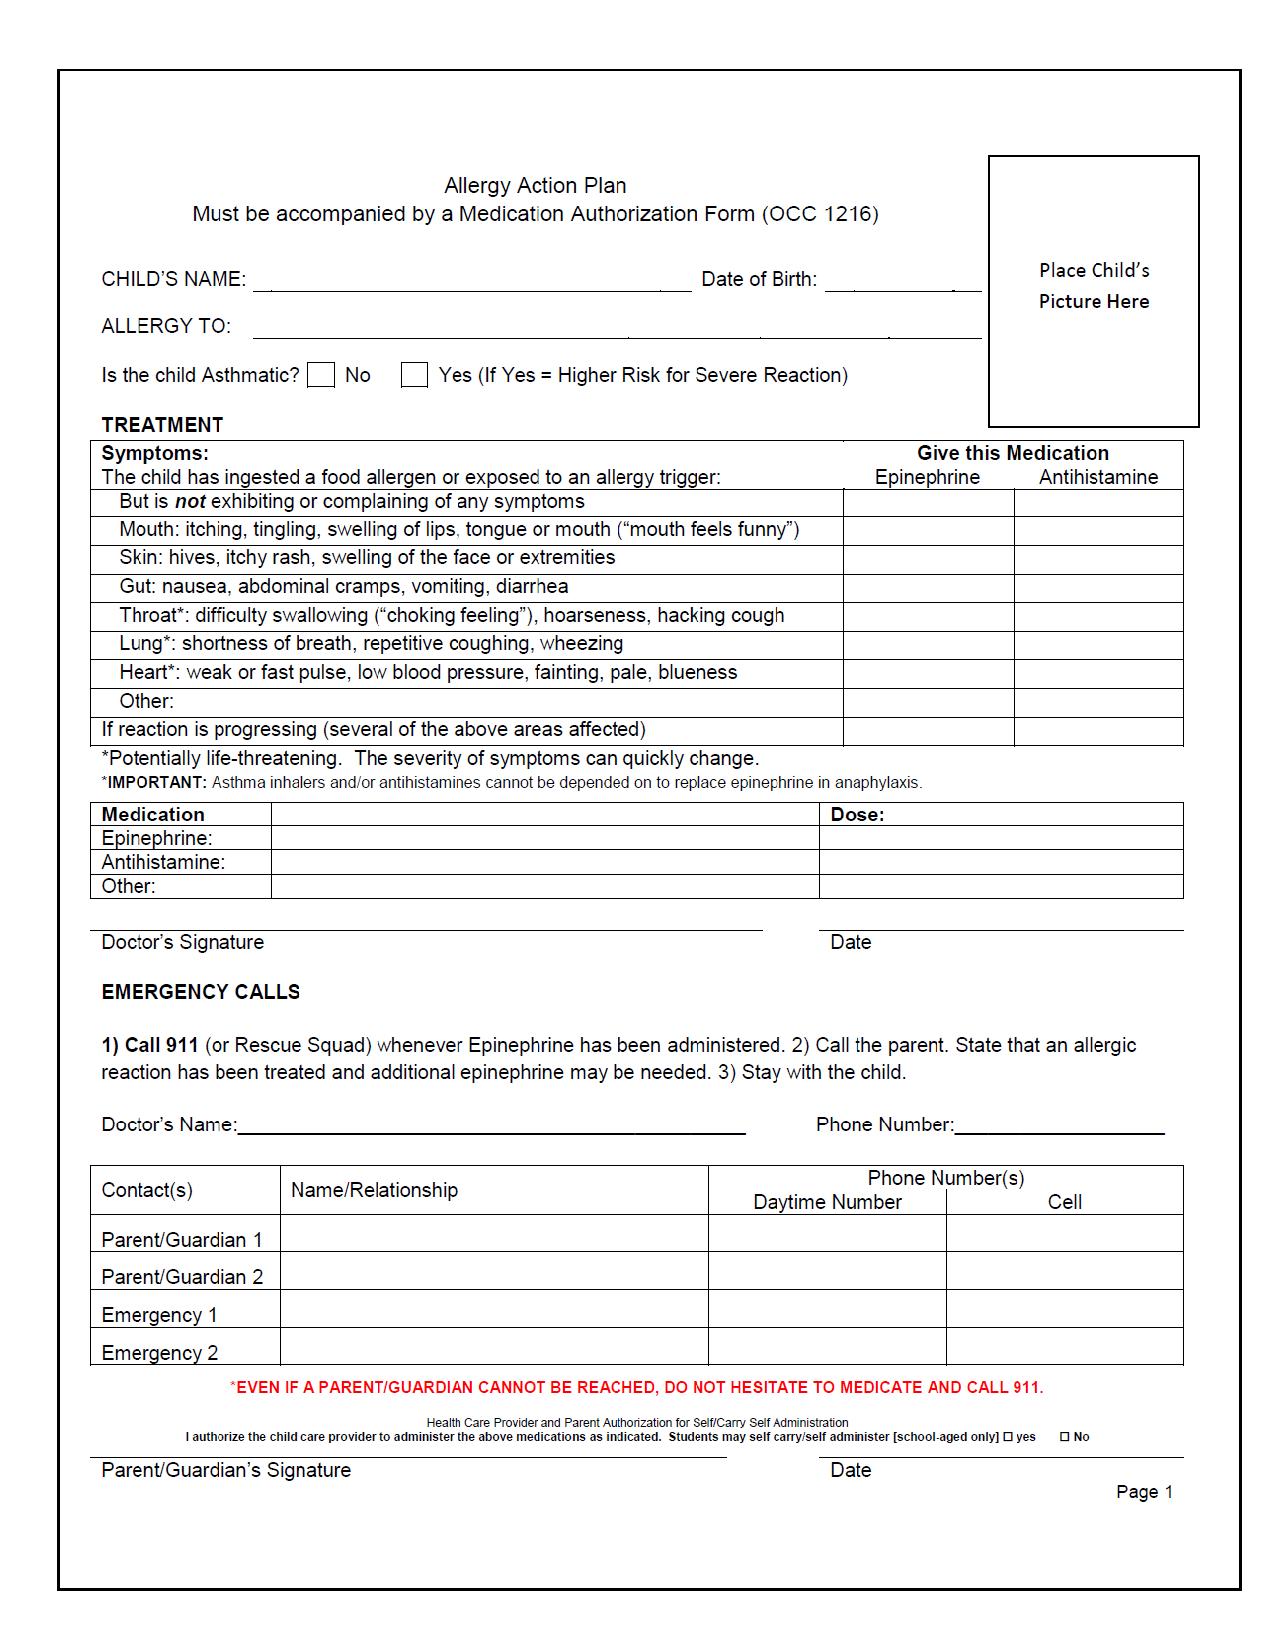 allergy action form page 0011